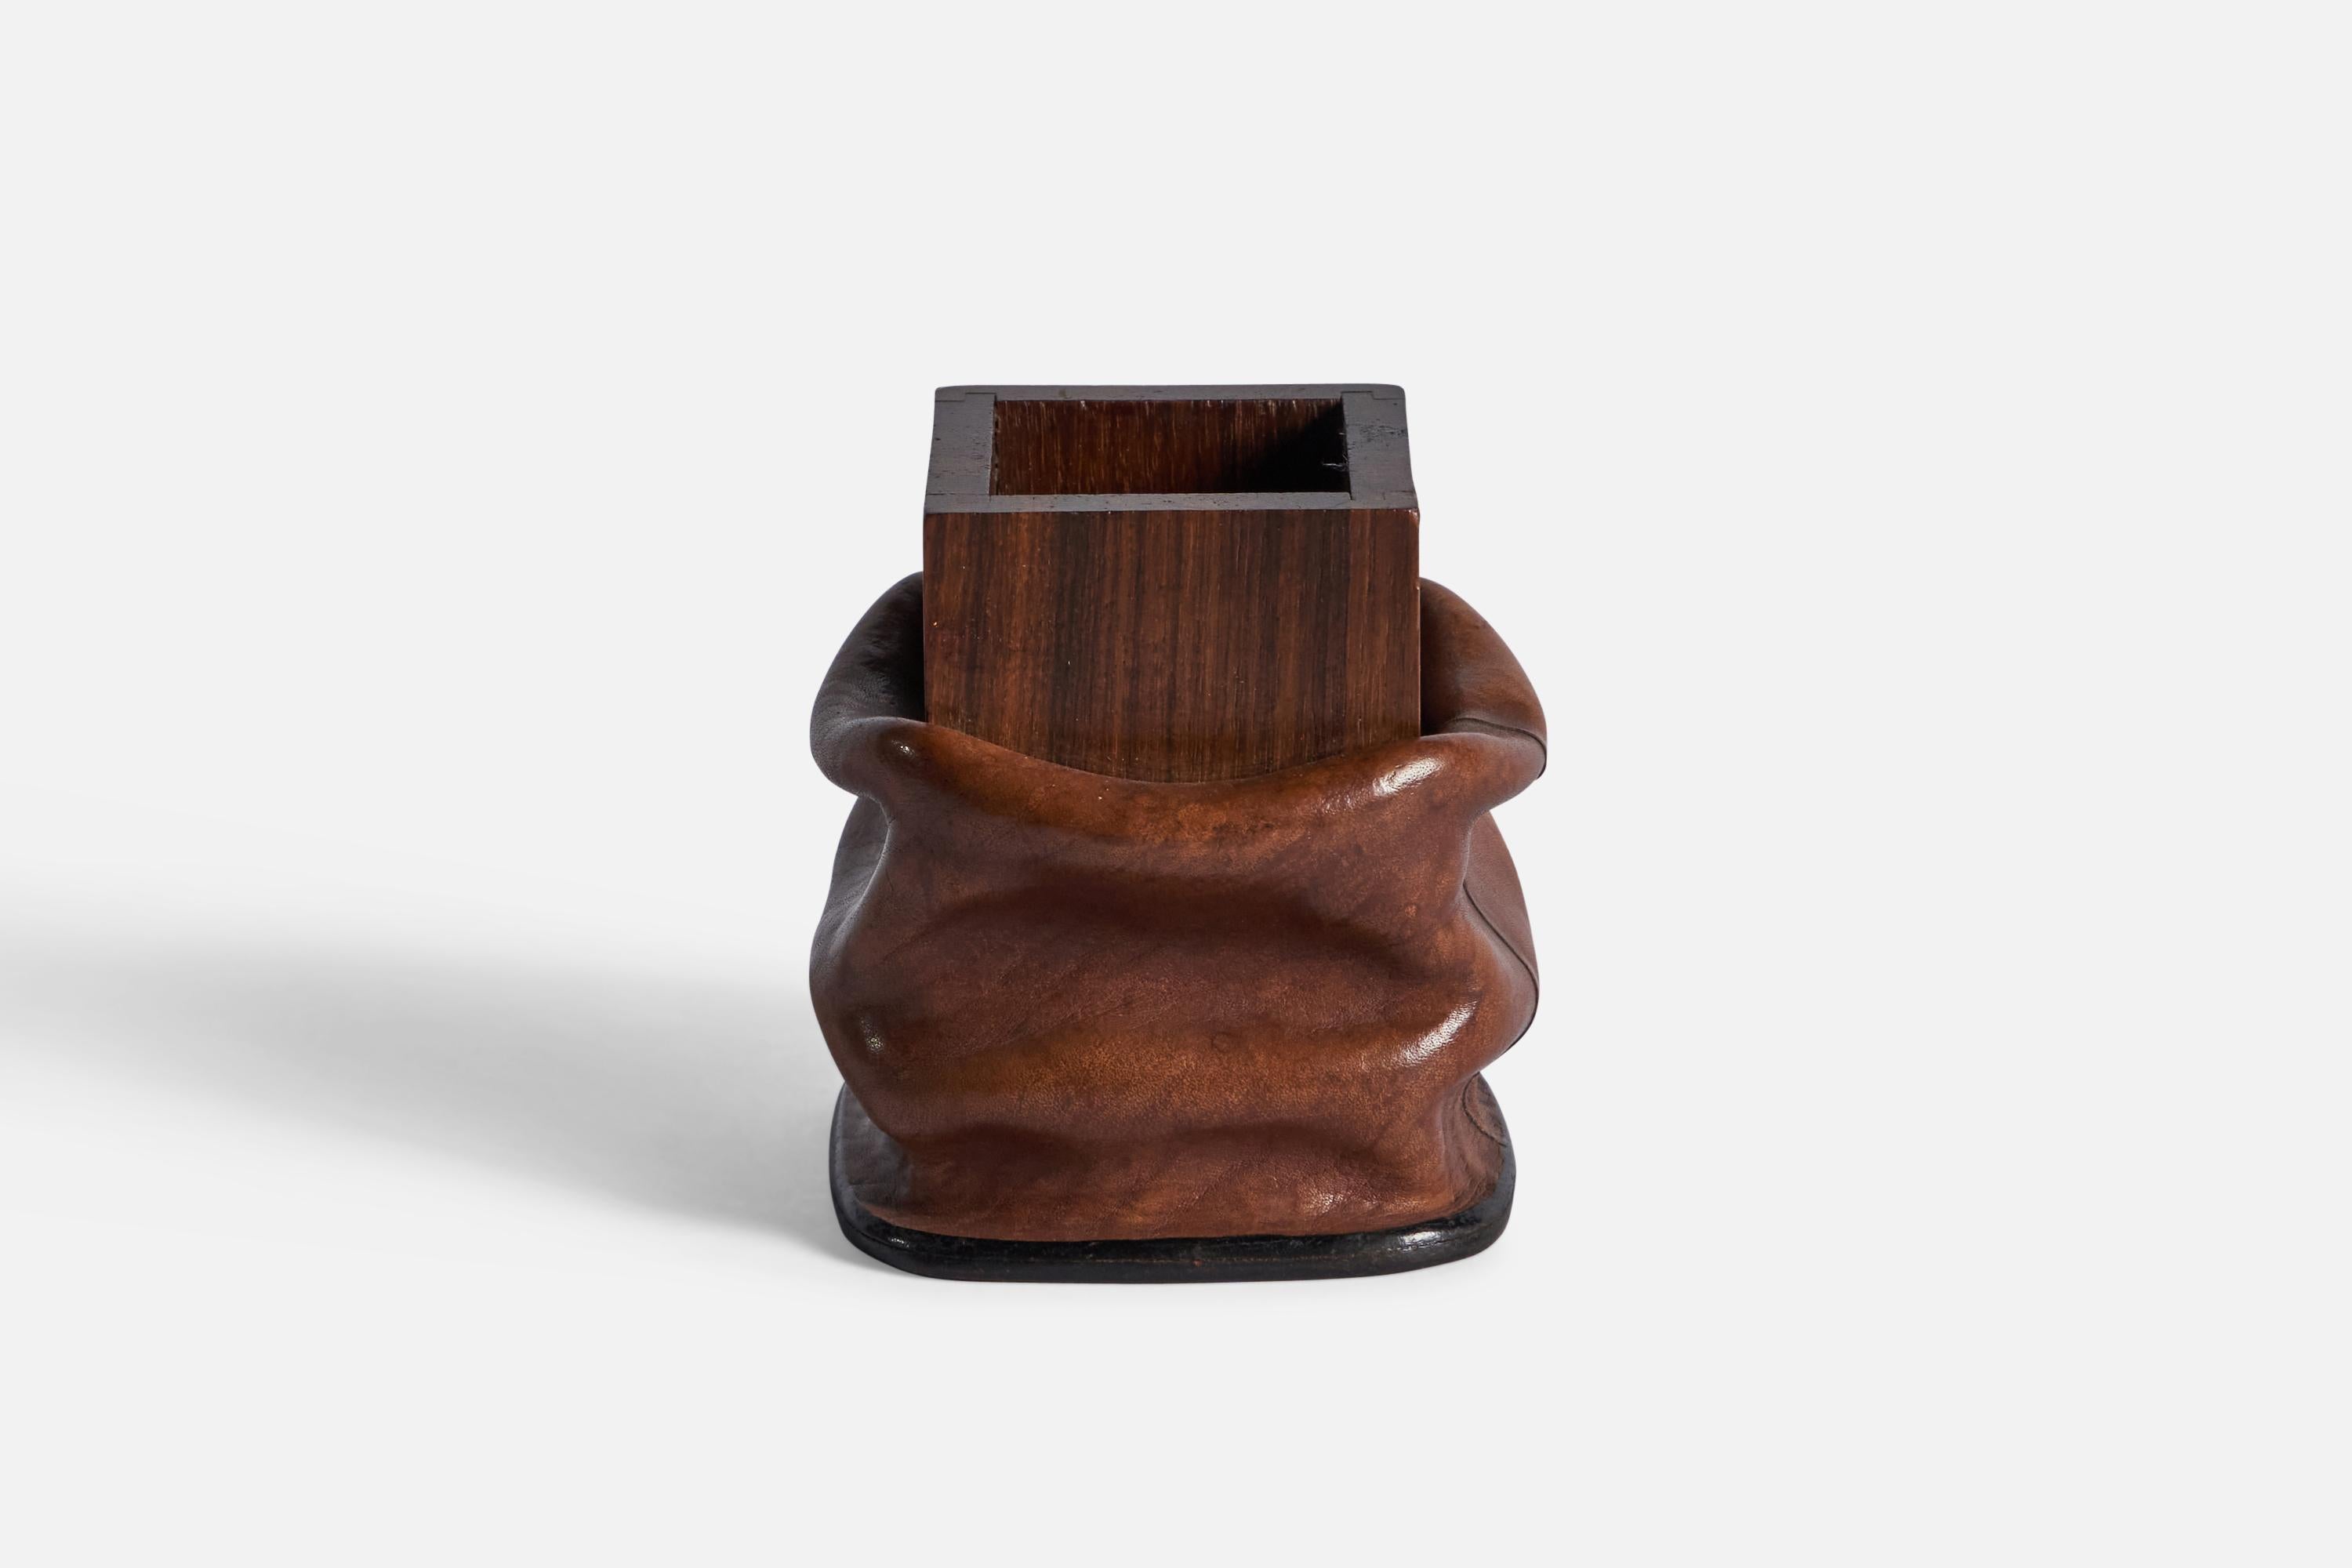 A wet-moulded leather and rosewood pen holder, designed and produced by Nova Tecno, Italy, c. 1960s.